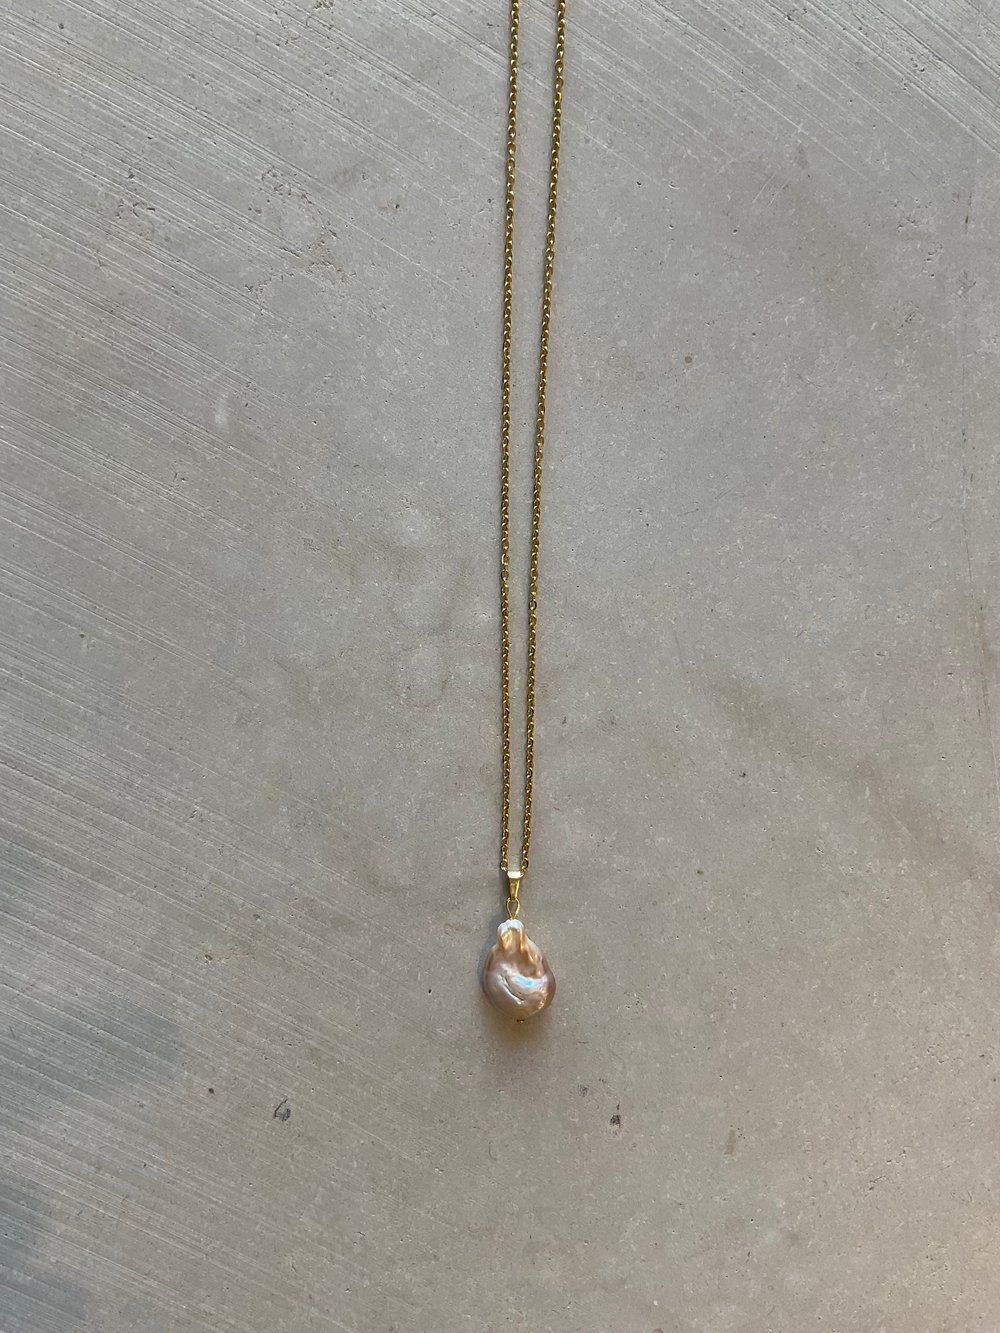 Gold necklace with sweet water pearl